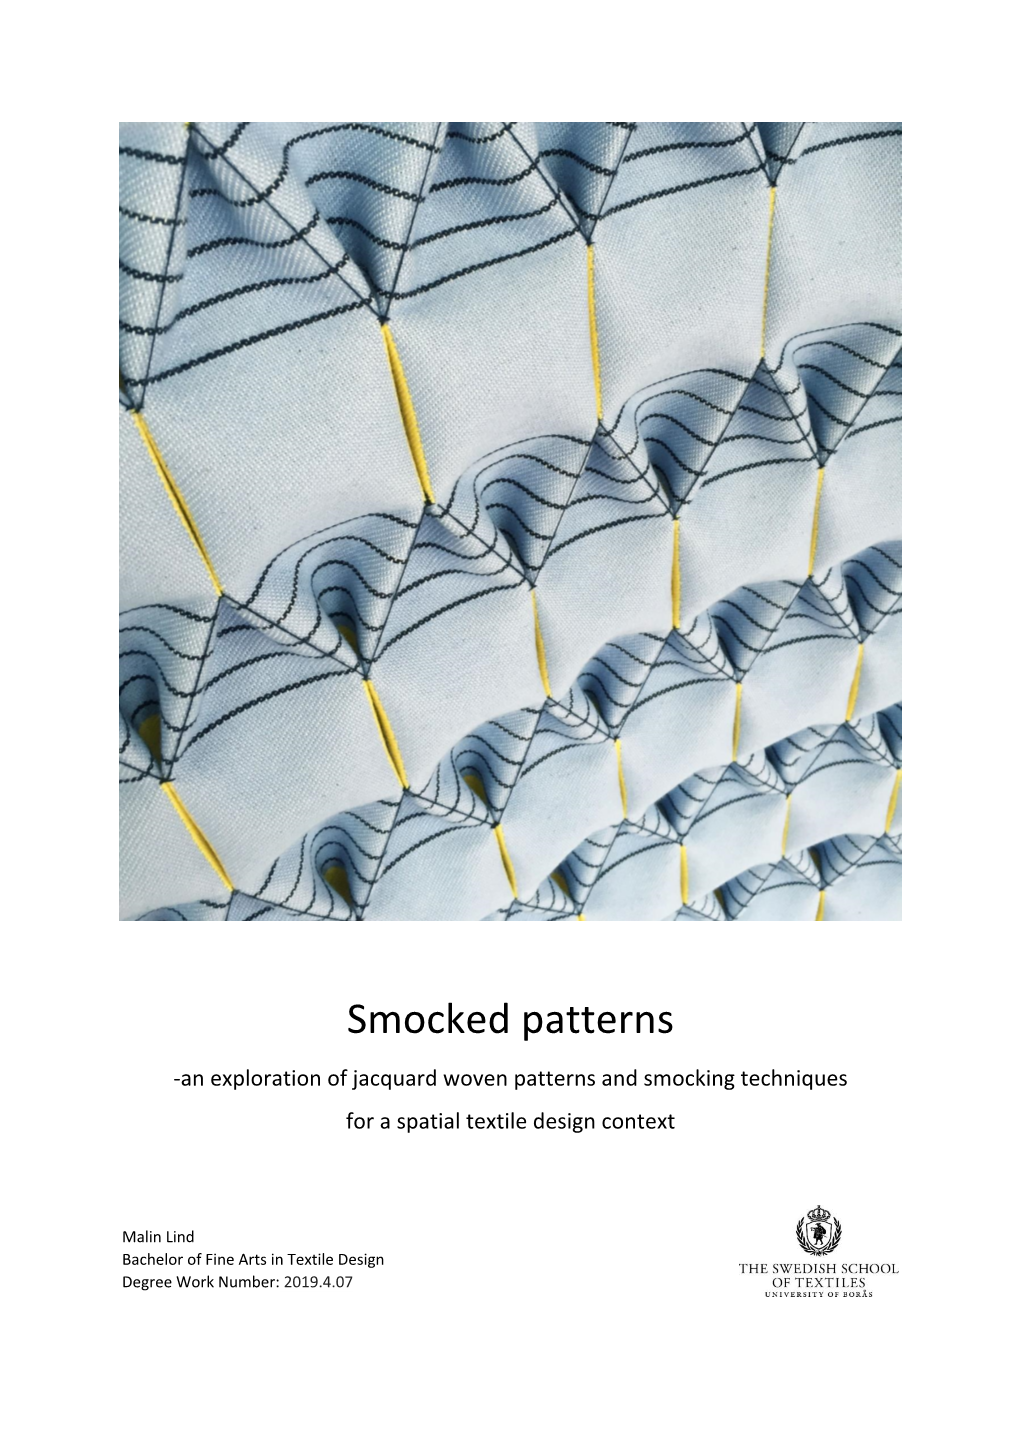 Smocked Patterns -An Exploration of Jacquard Woven Patterns and Smocking Techniques for a Spatial Textile Design Context